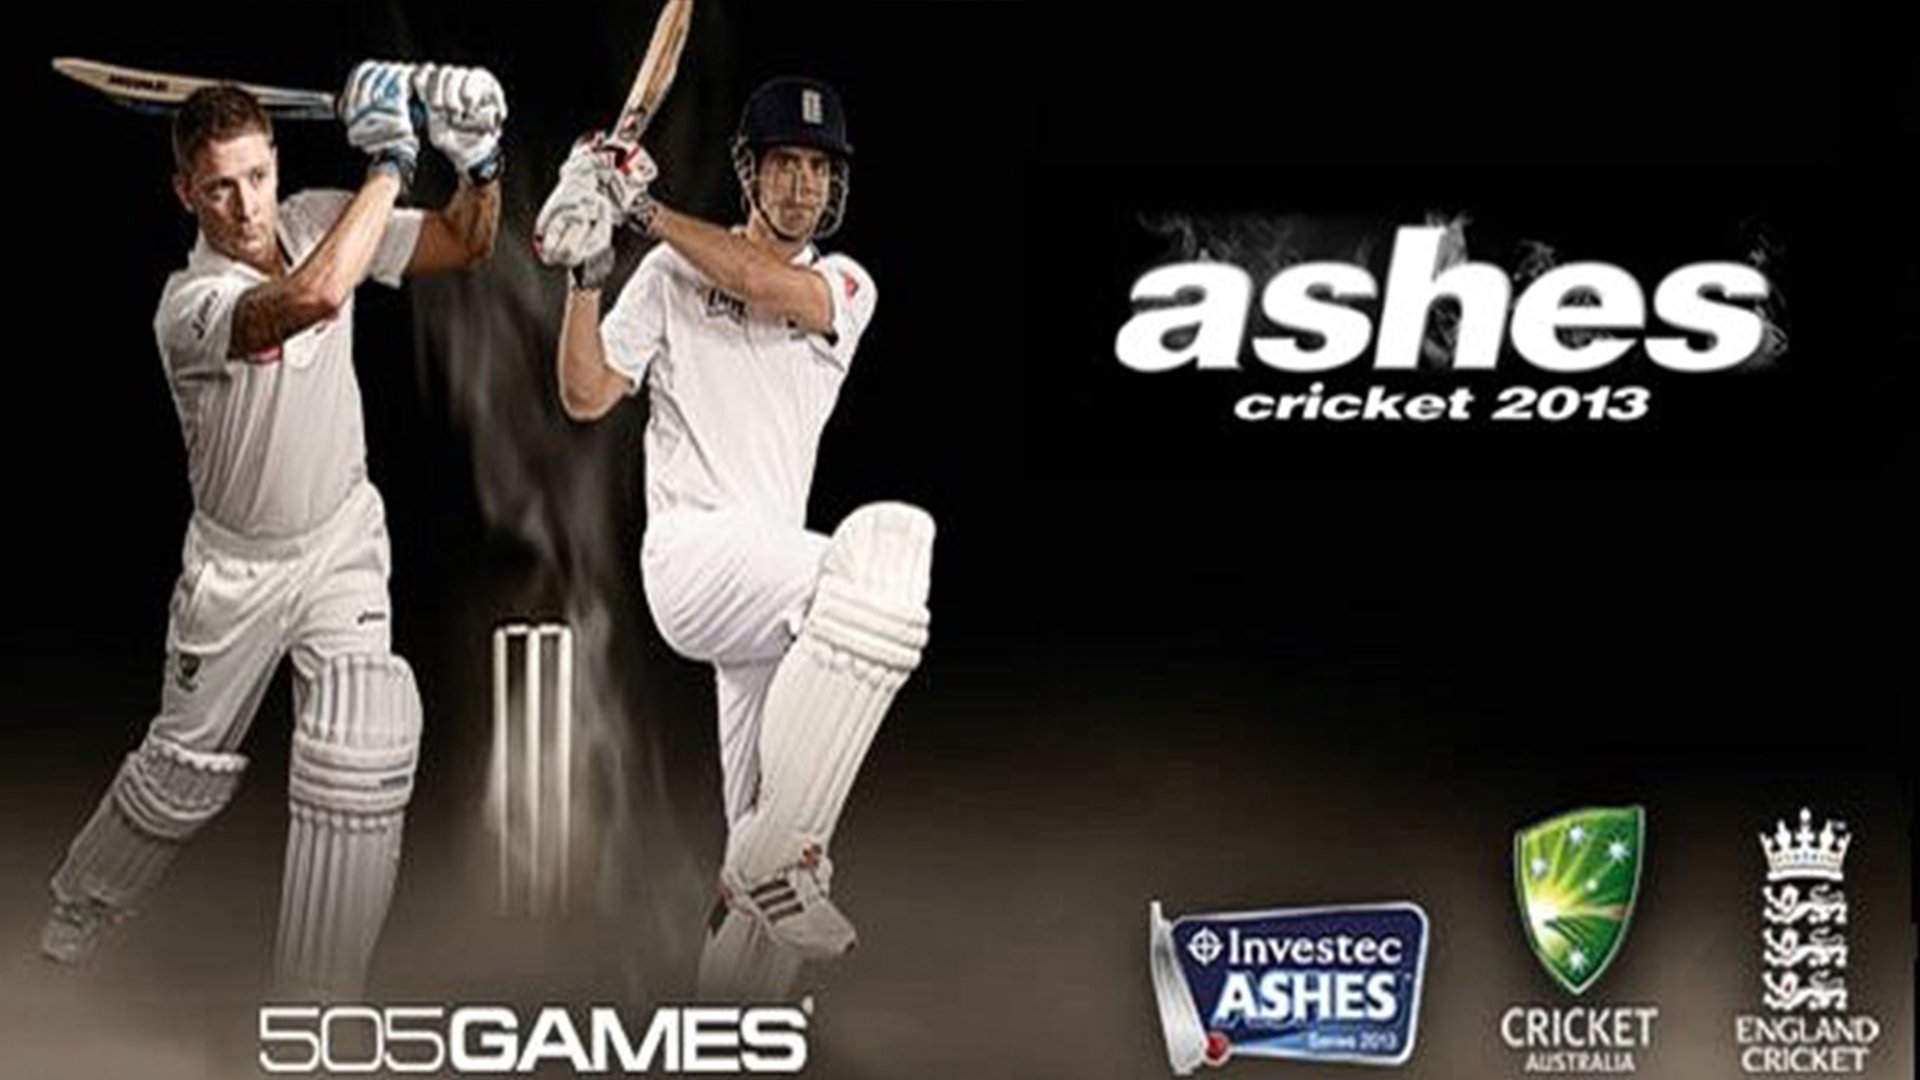 ashes cricket for pc